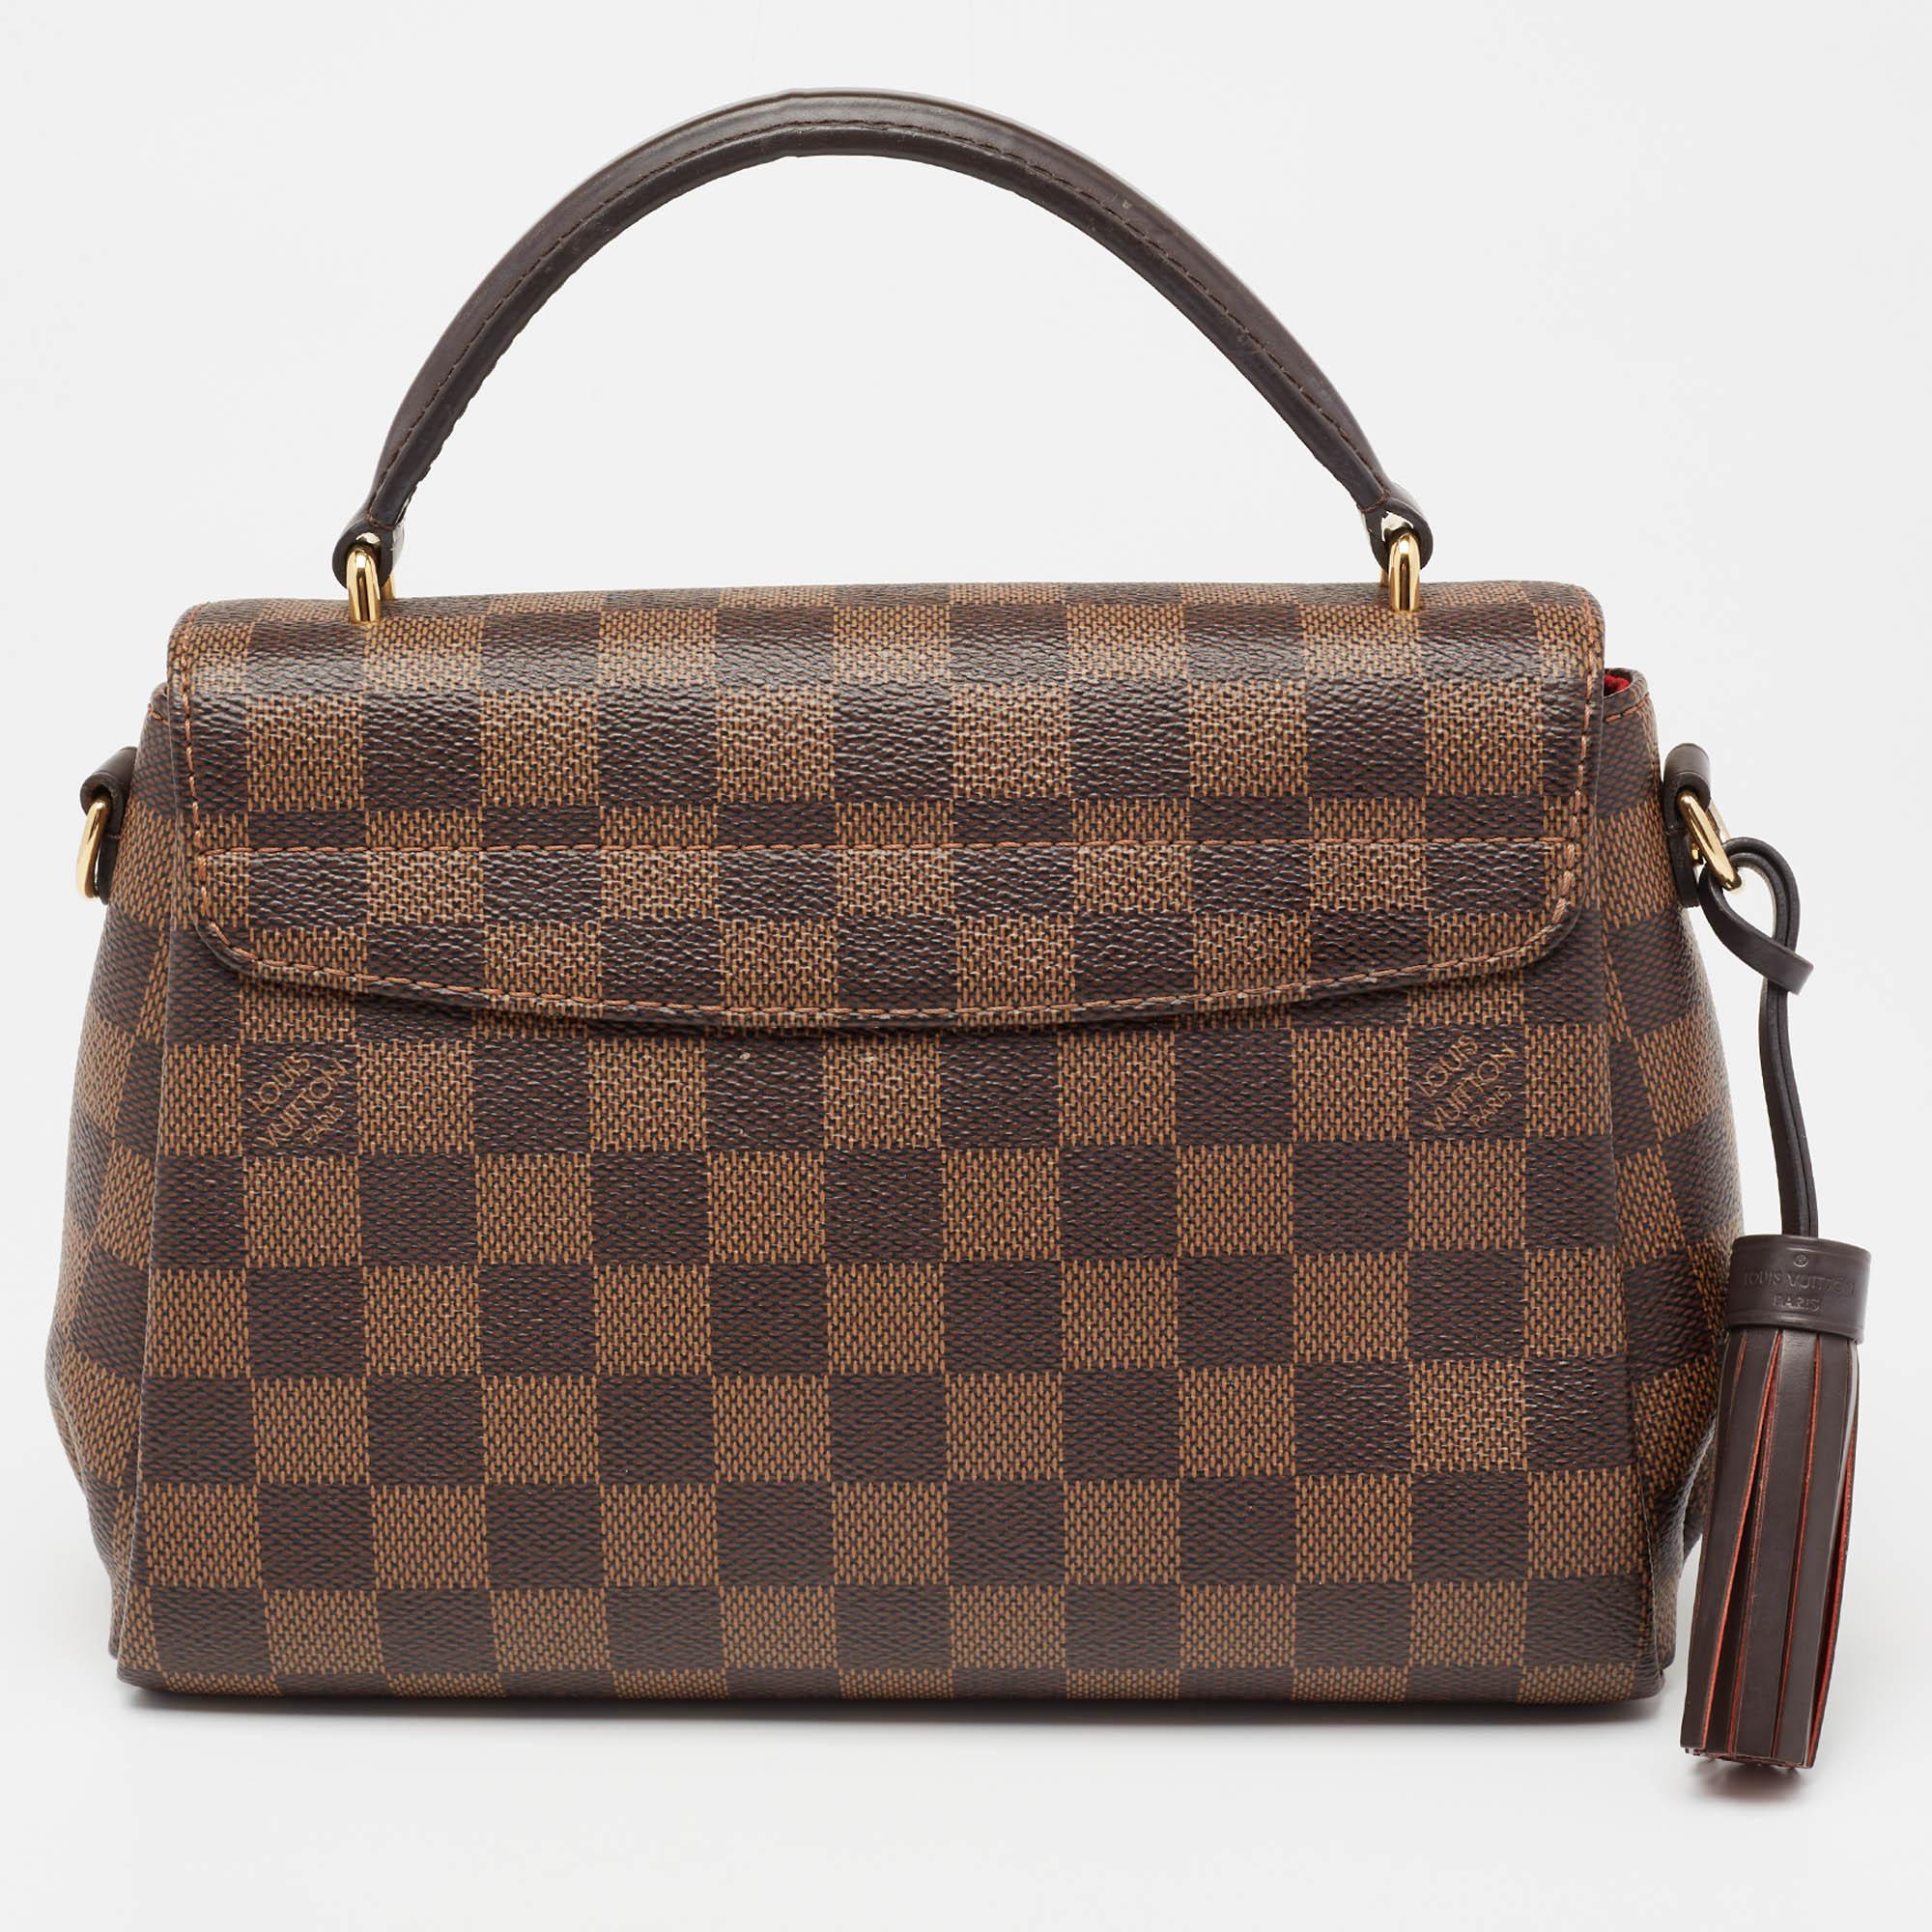 Treat yourself with this Croisette bag by Louis Vuitton. This structured style is crafted from the signature Damier Ebene canvas. It is detailed with a logo-engraved lock in gold-tone hardware, a top handle, and a slender shoulder strap for